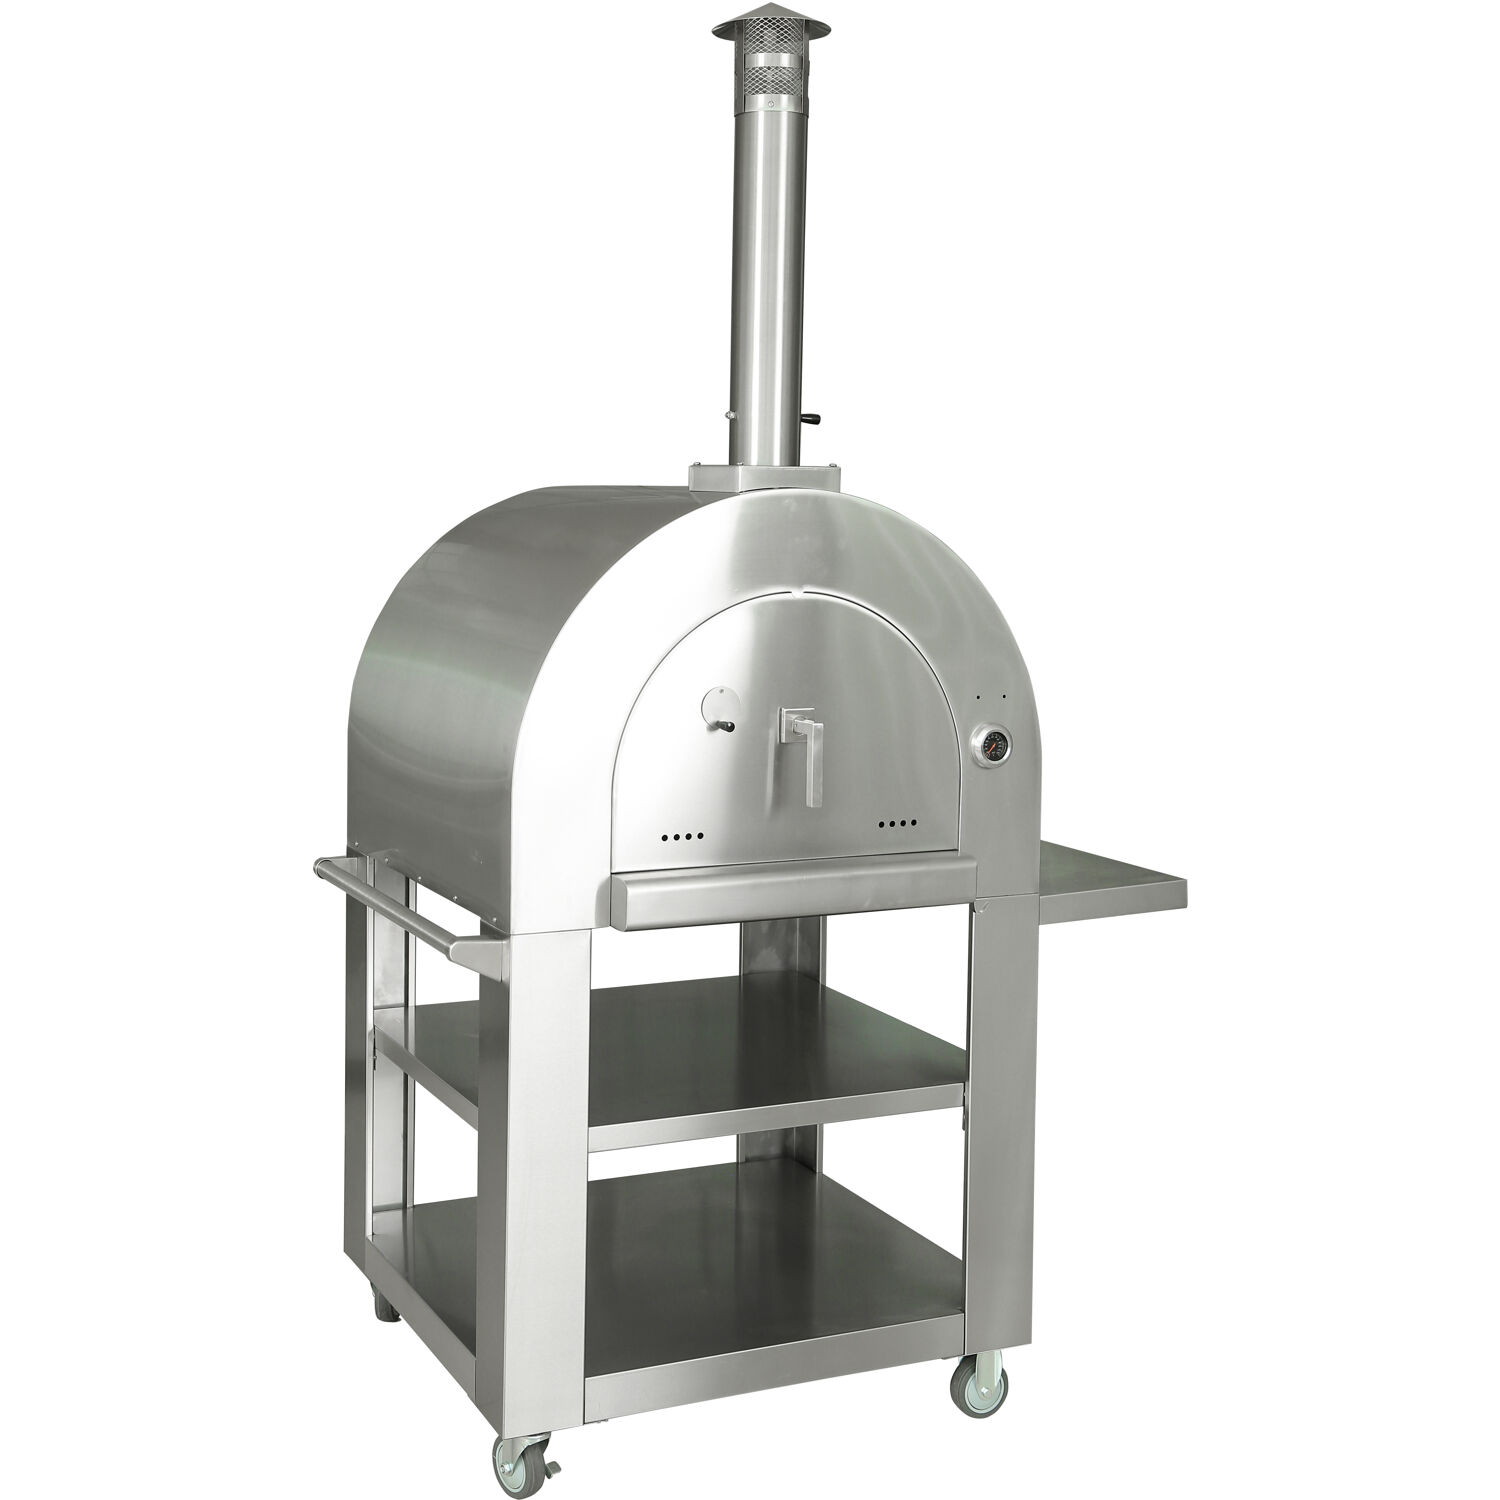 Hanover Portable Outdoor Wood Fired Pizza Oven | Stainless Steel Freestanding Homemade Pizza Maker with Built-In Thermometer, Shelves, Castors, and Ash-Tray - image 2 of 11